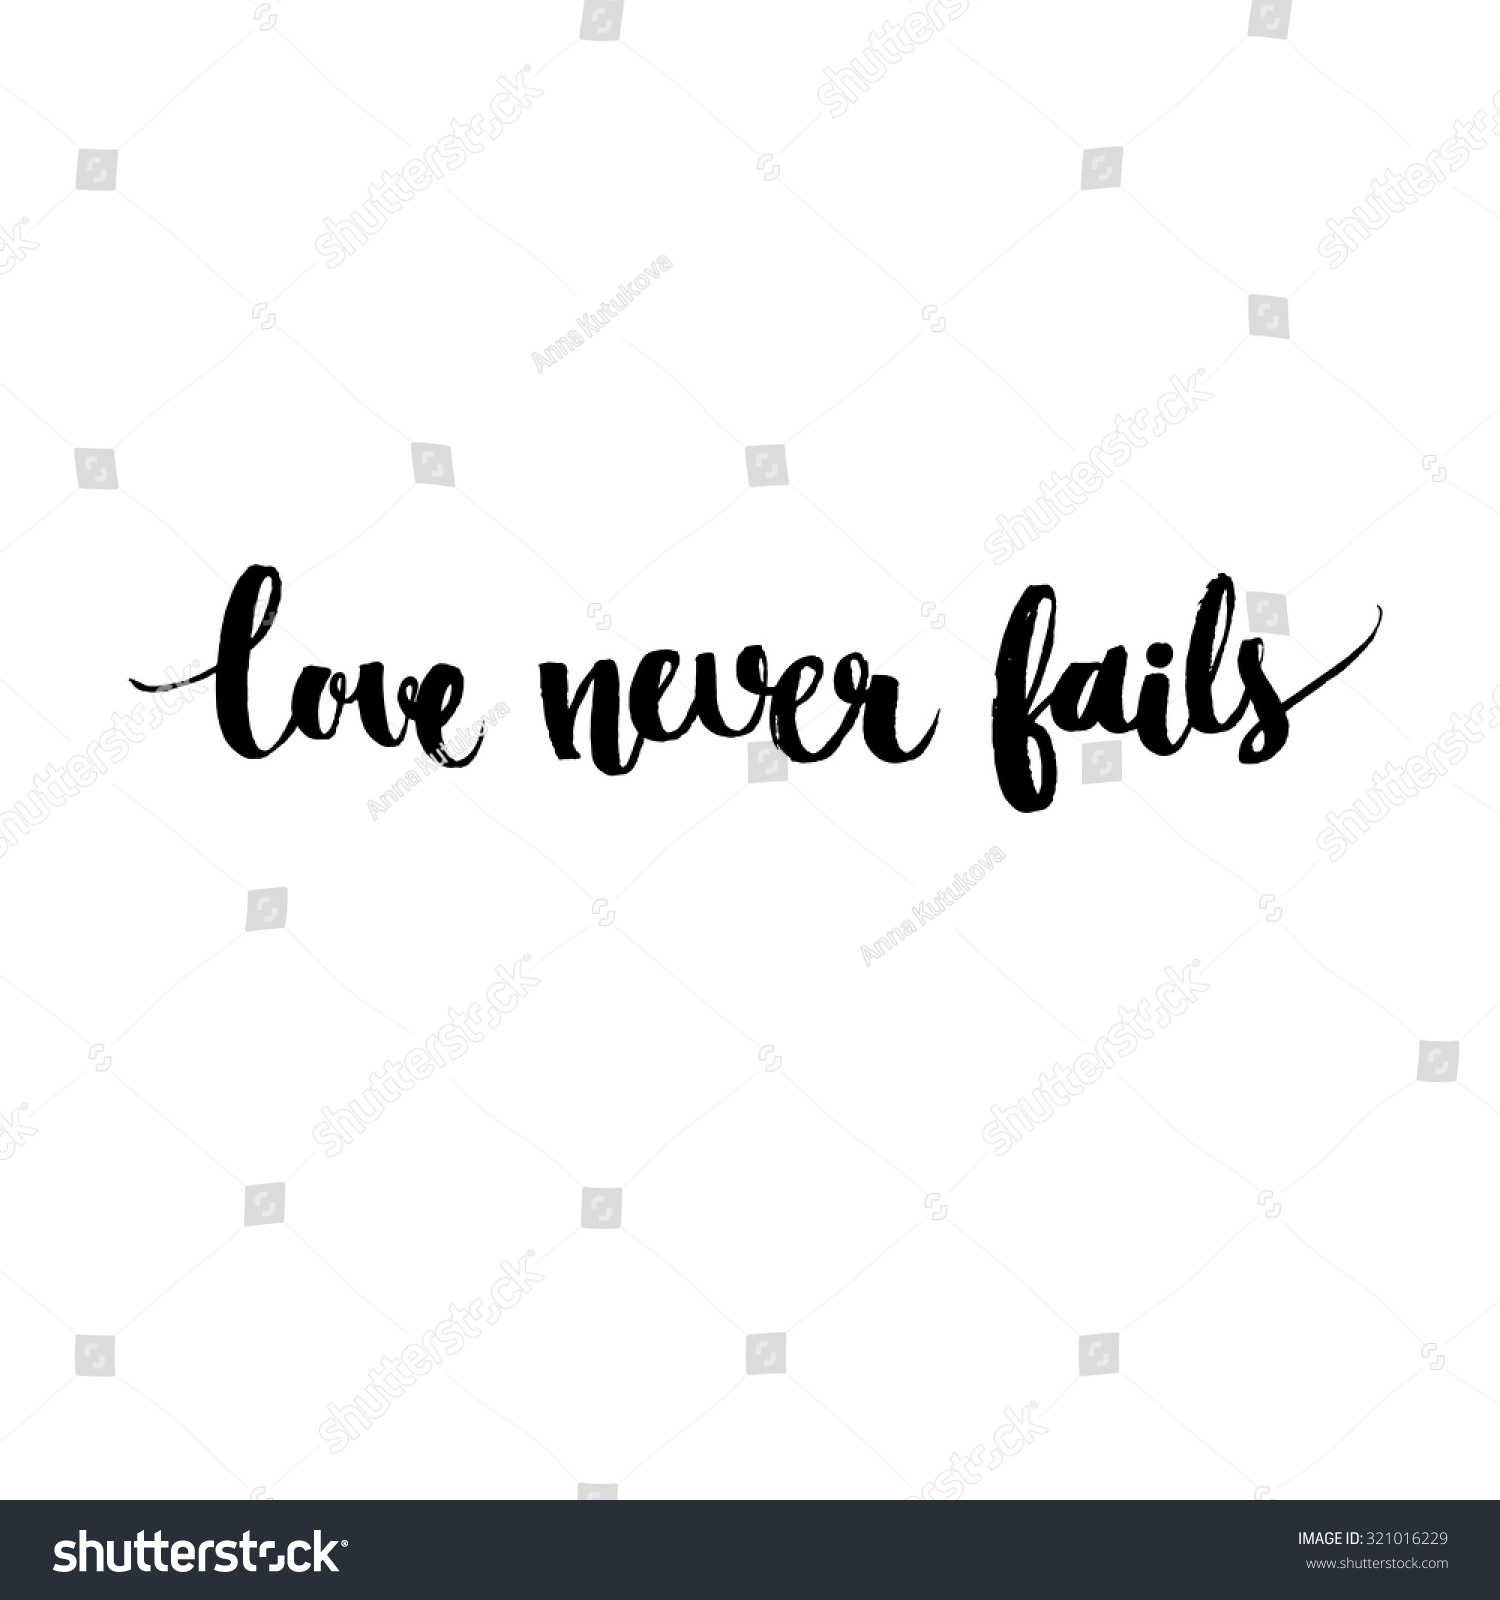 Love never fails Black vector inspirational quote handwritten modern calligraphy style Brush typography